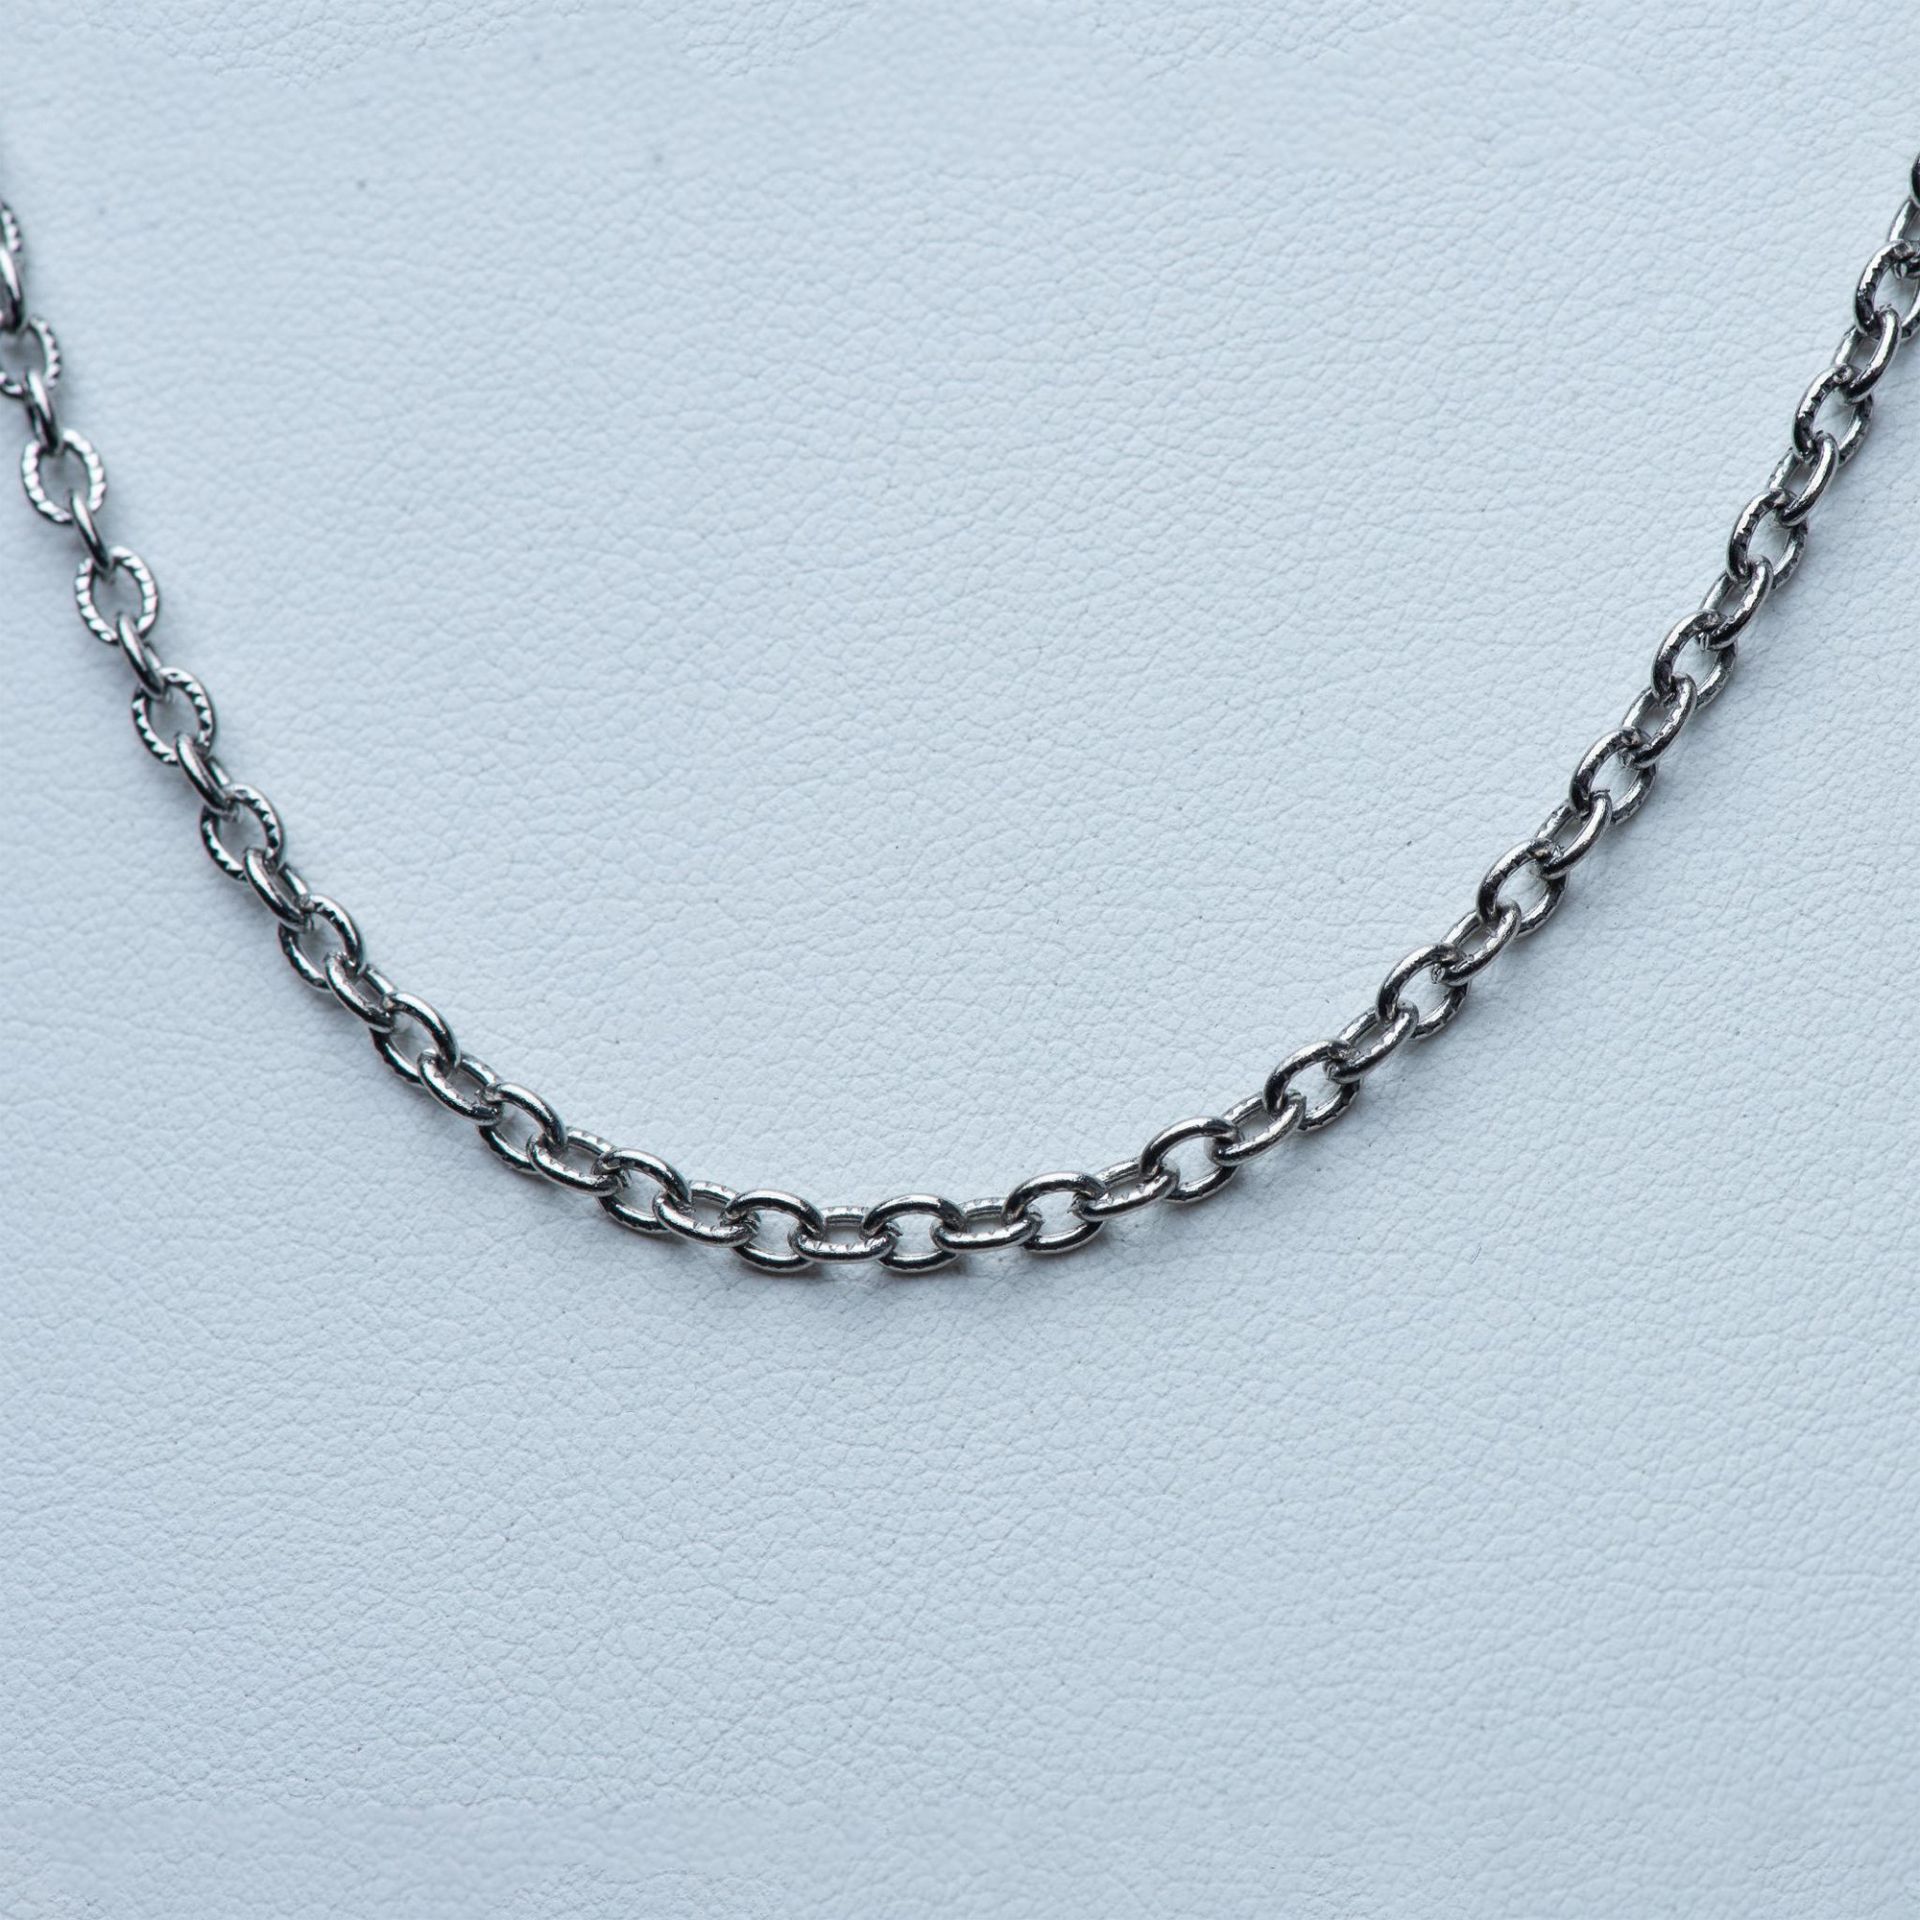 5pc Silver Tone Necklaces and Bracelet - Image 6 of 10